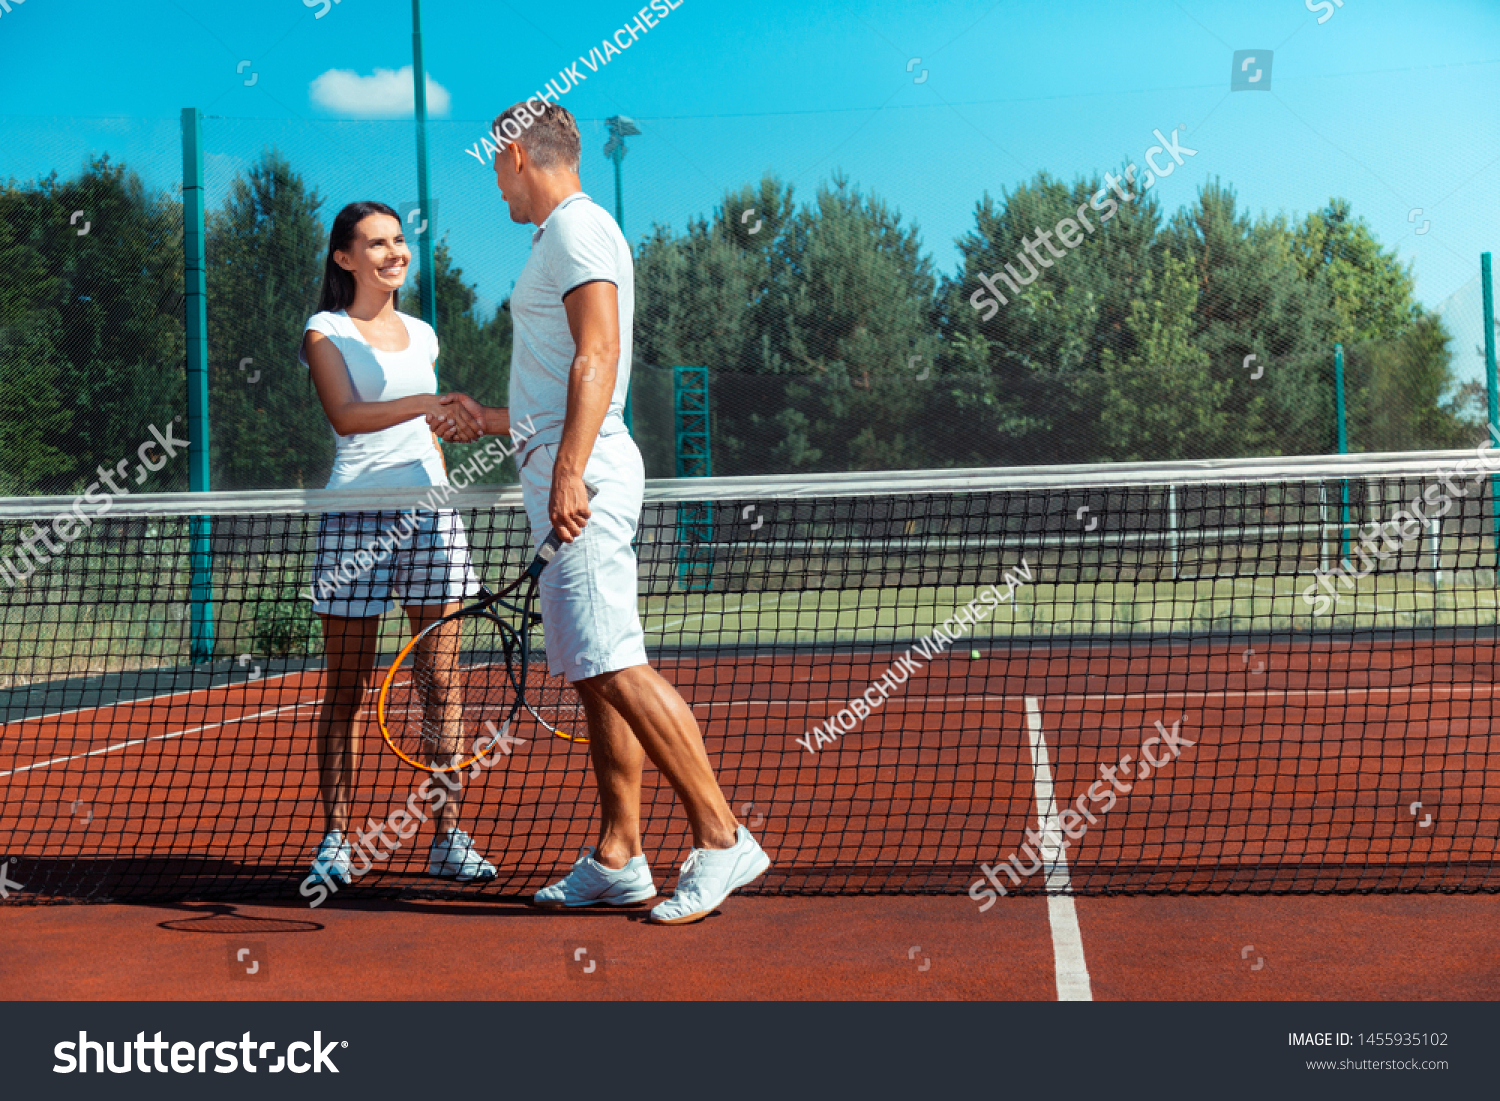 Beaming wife. Beaming wife wearing white t-shirt feeling happy after playing tennis with husband #1455935102